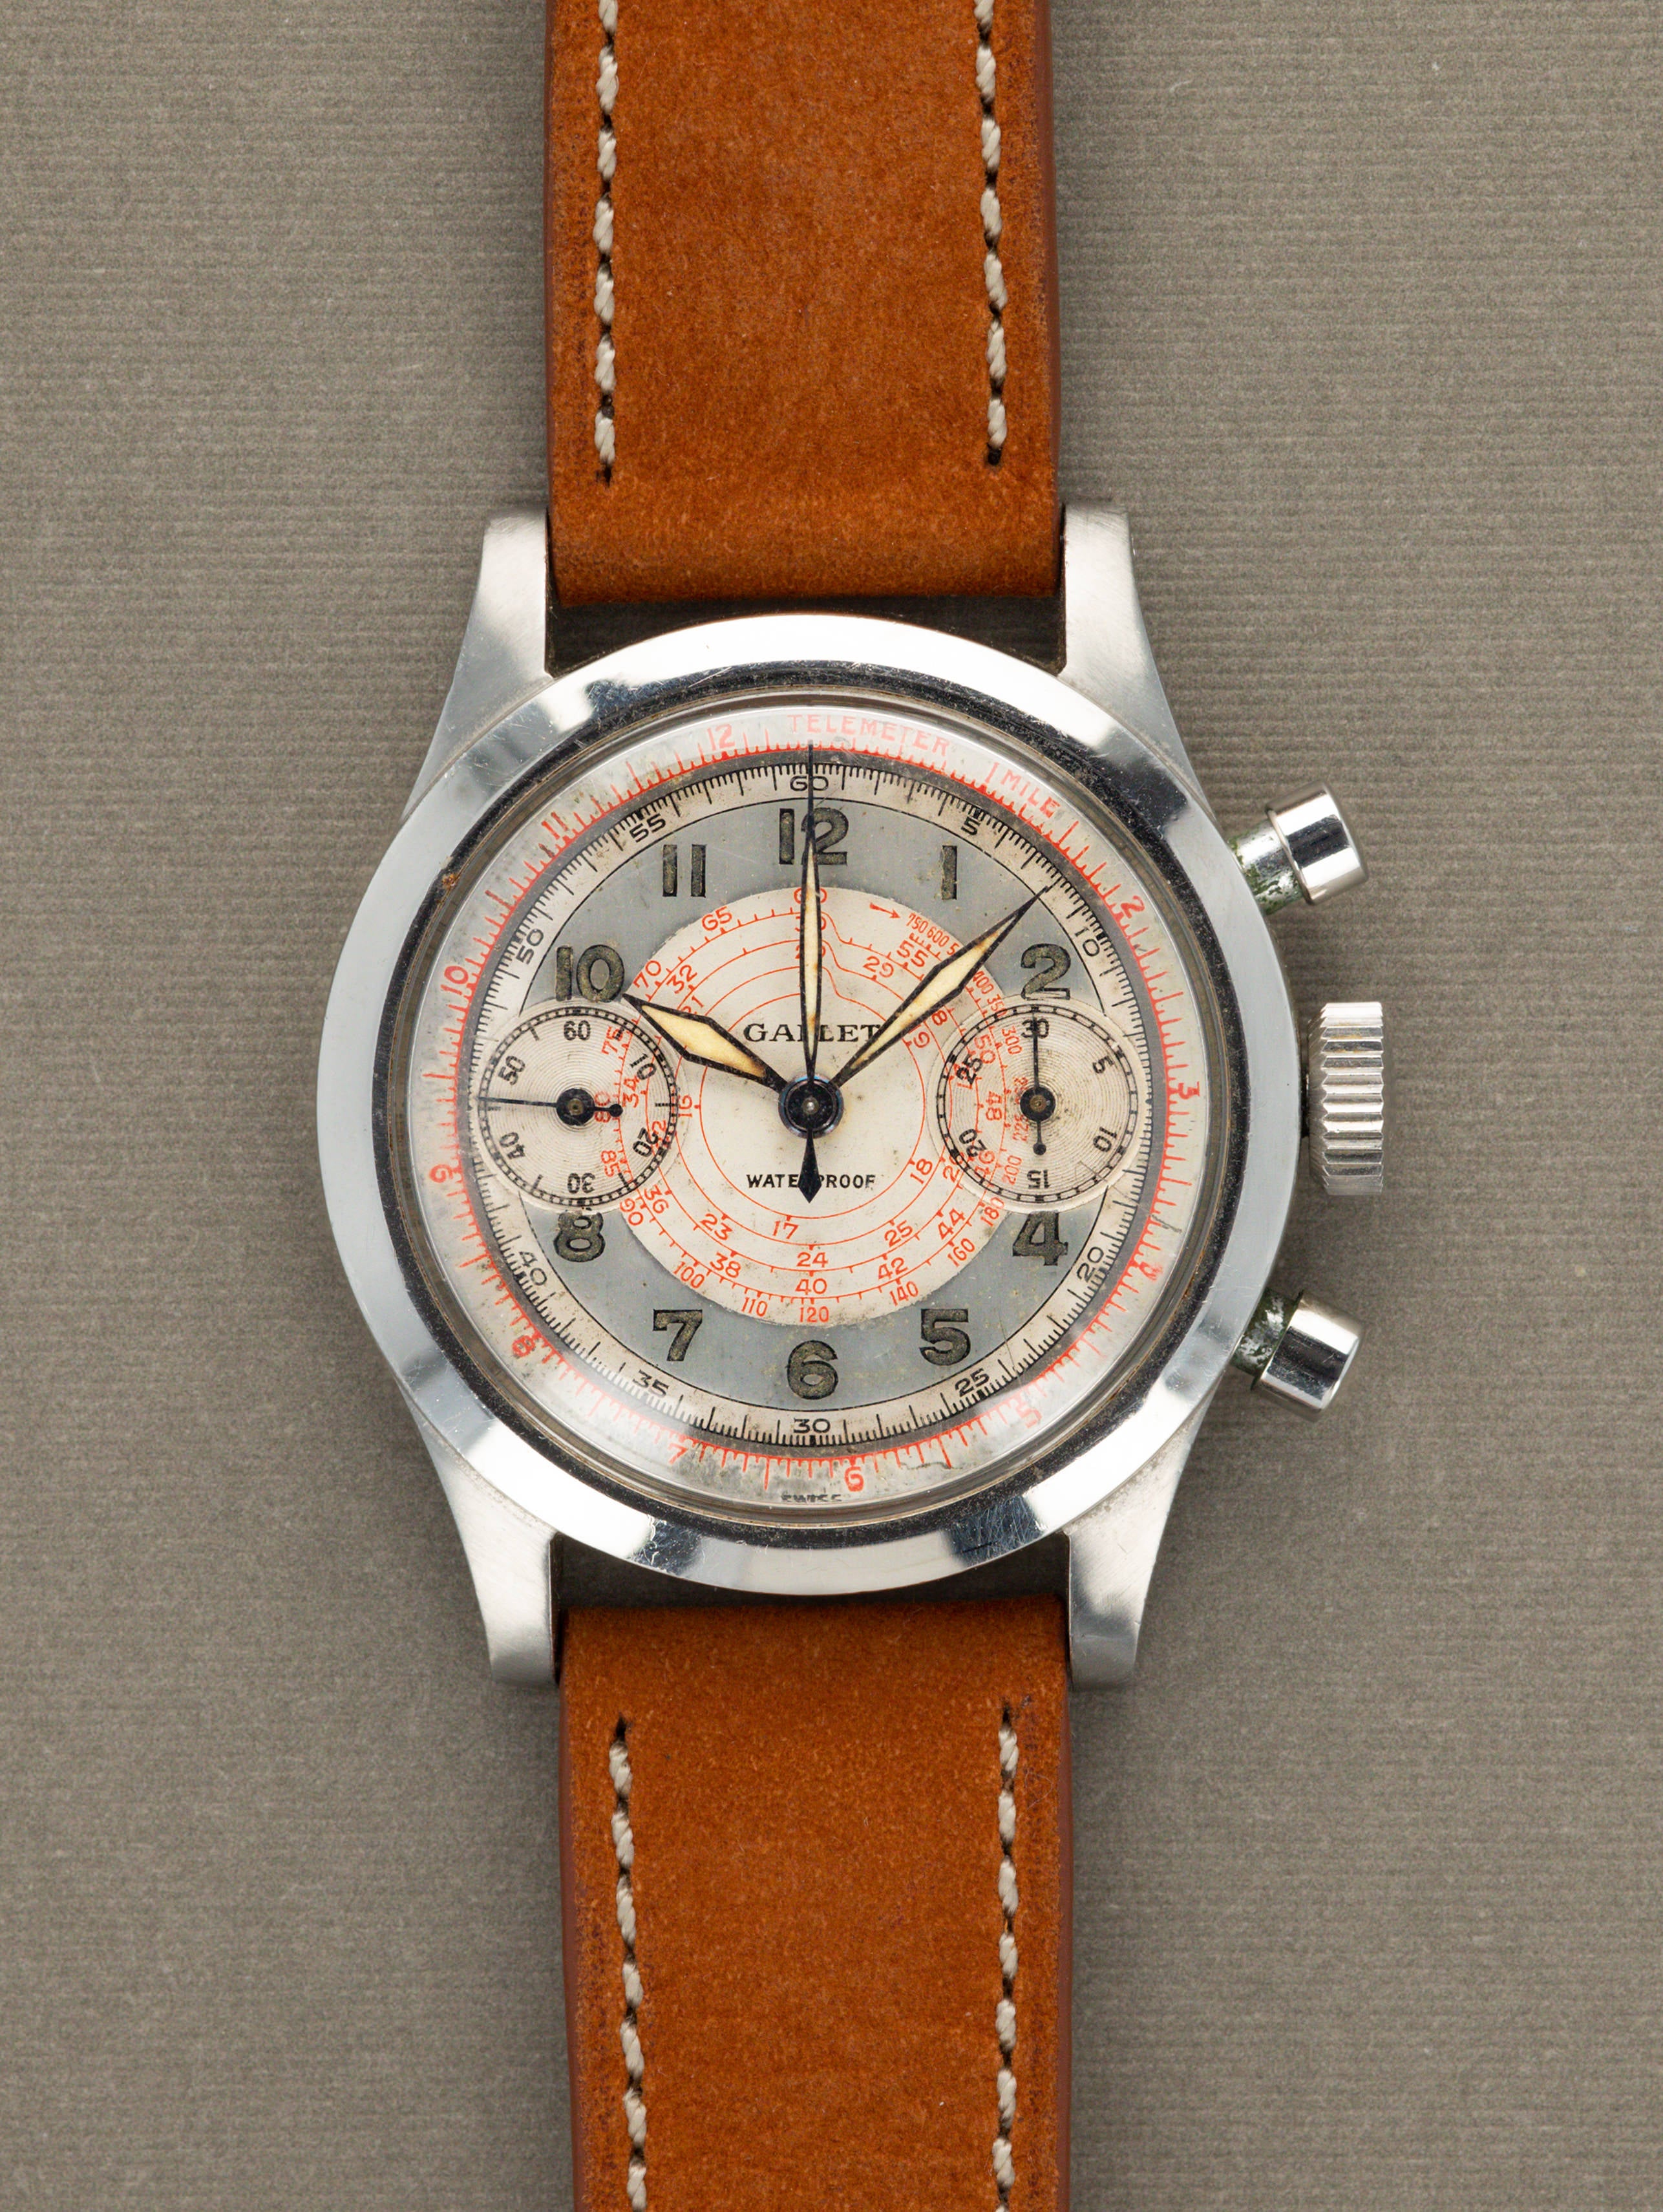 Gallet MultiChron  30M Chronograph - 'Clamshell' Case